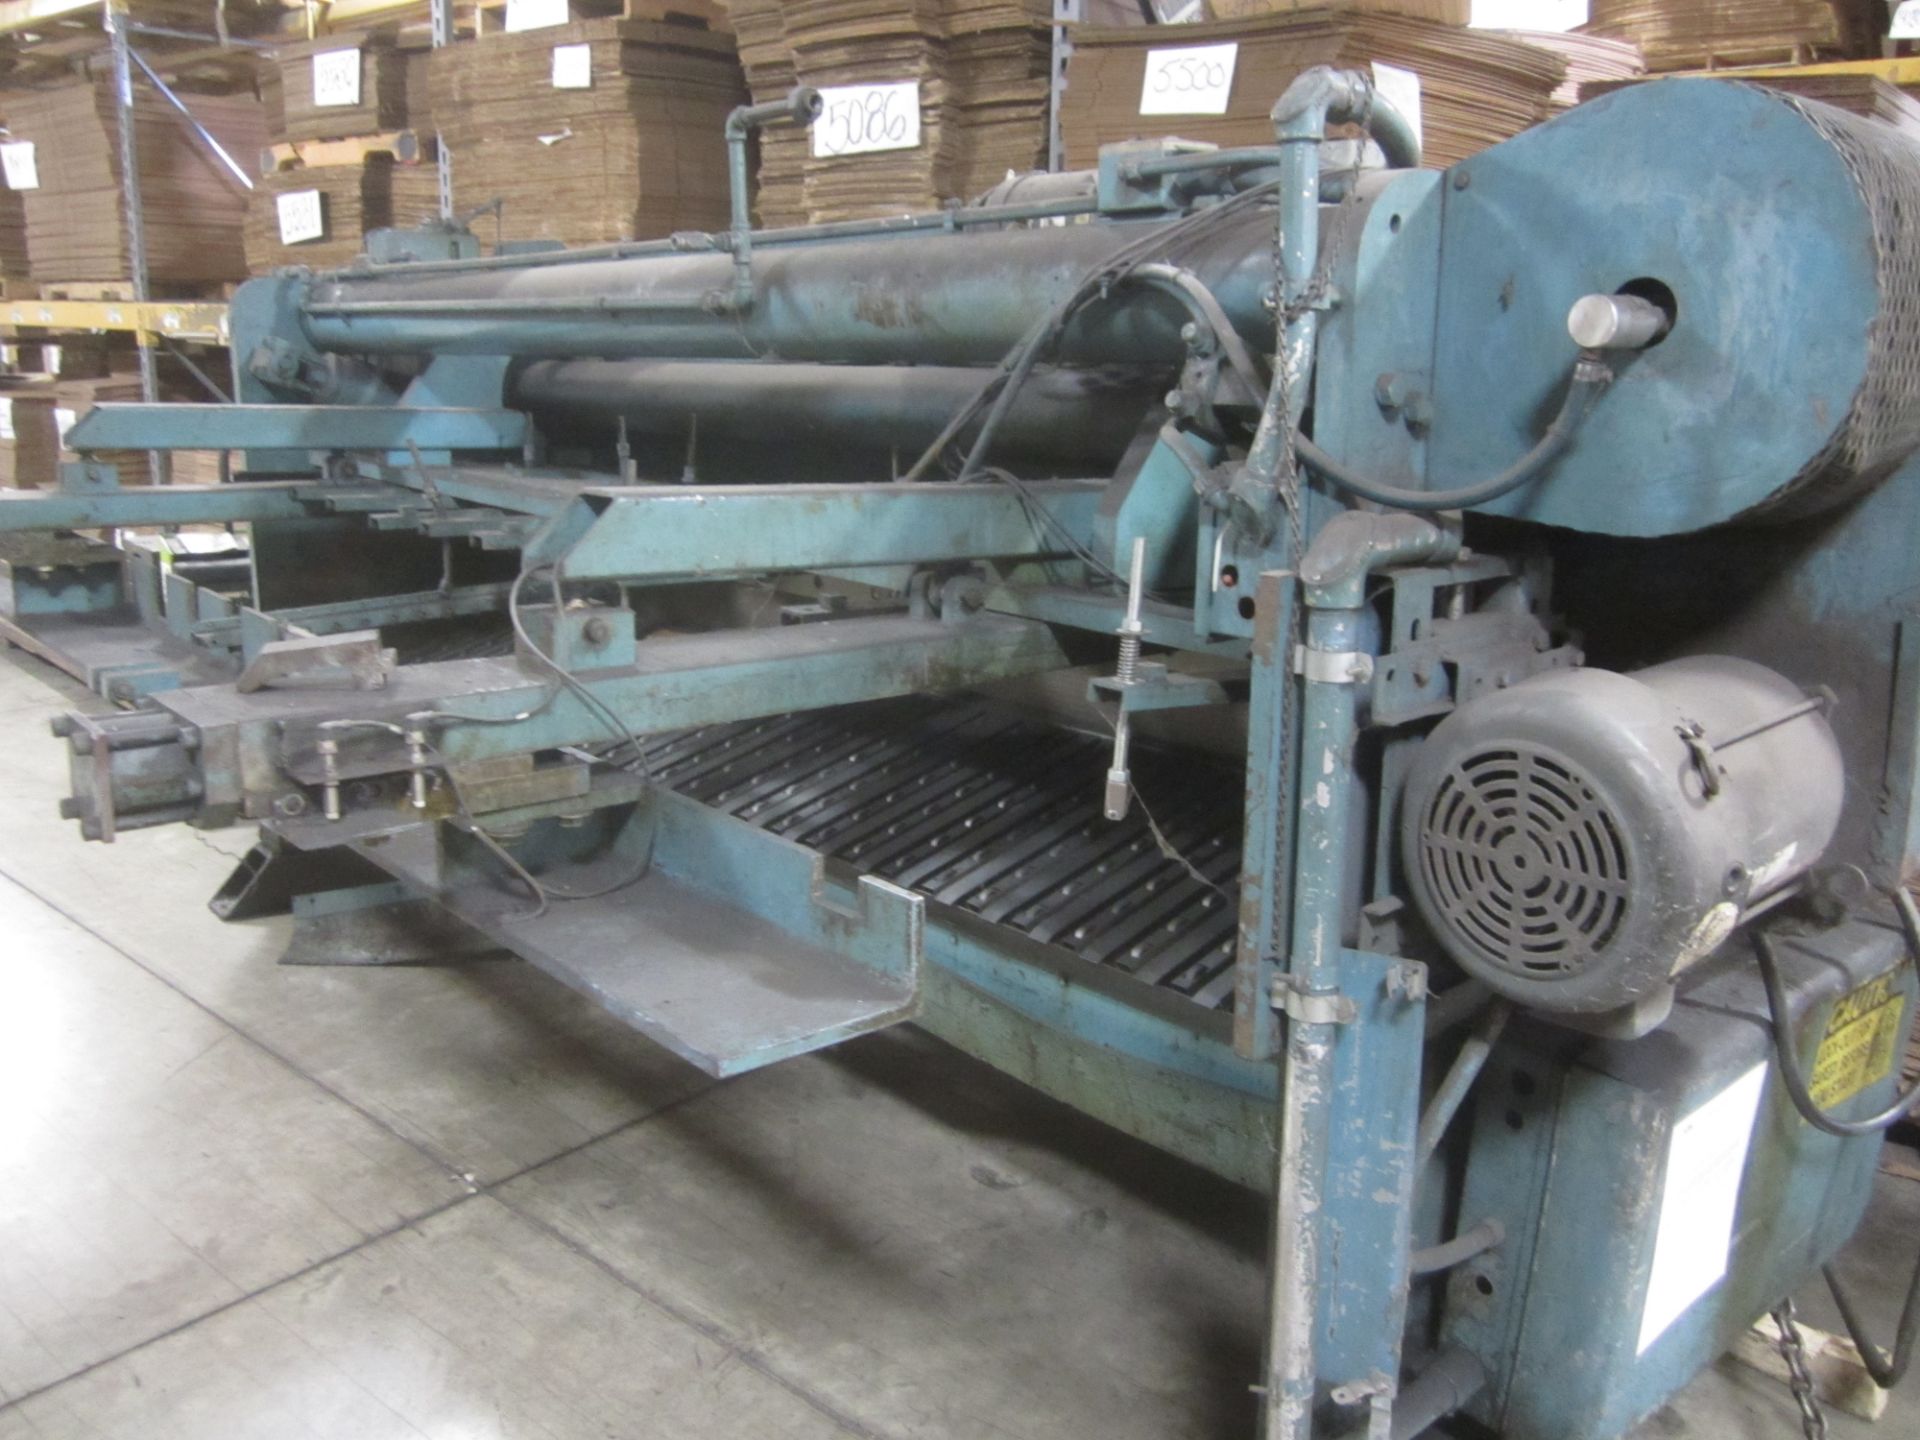 Lodge & Shipley Model U2L0-SL Power Squaring Shear, s/n 47331, 10’ X 10 Gage, Front Operated - Image 3 of 9